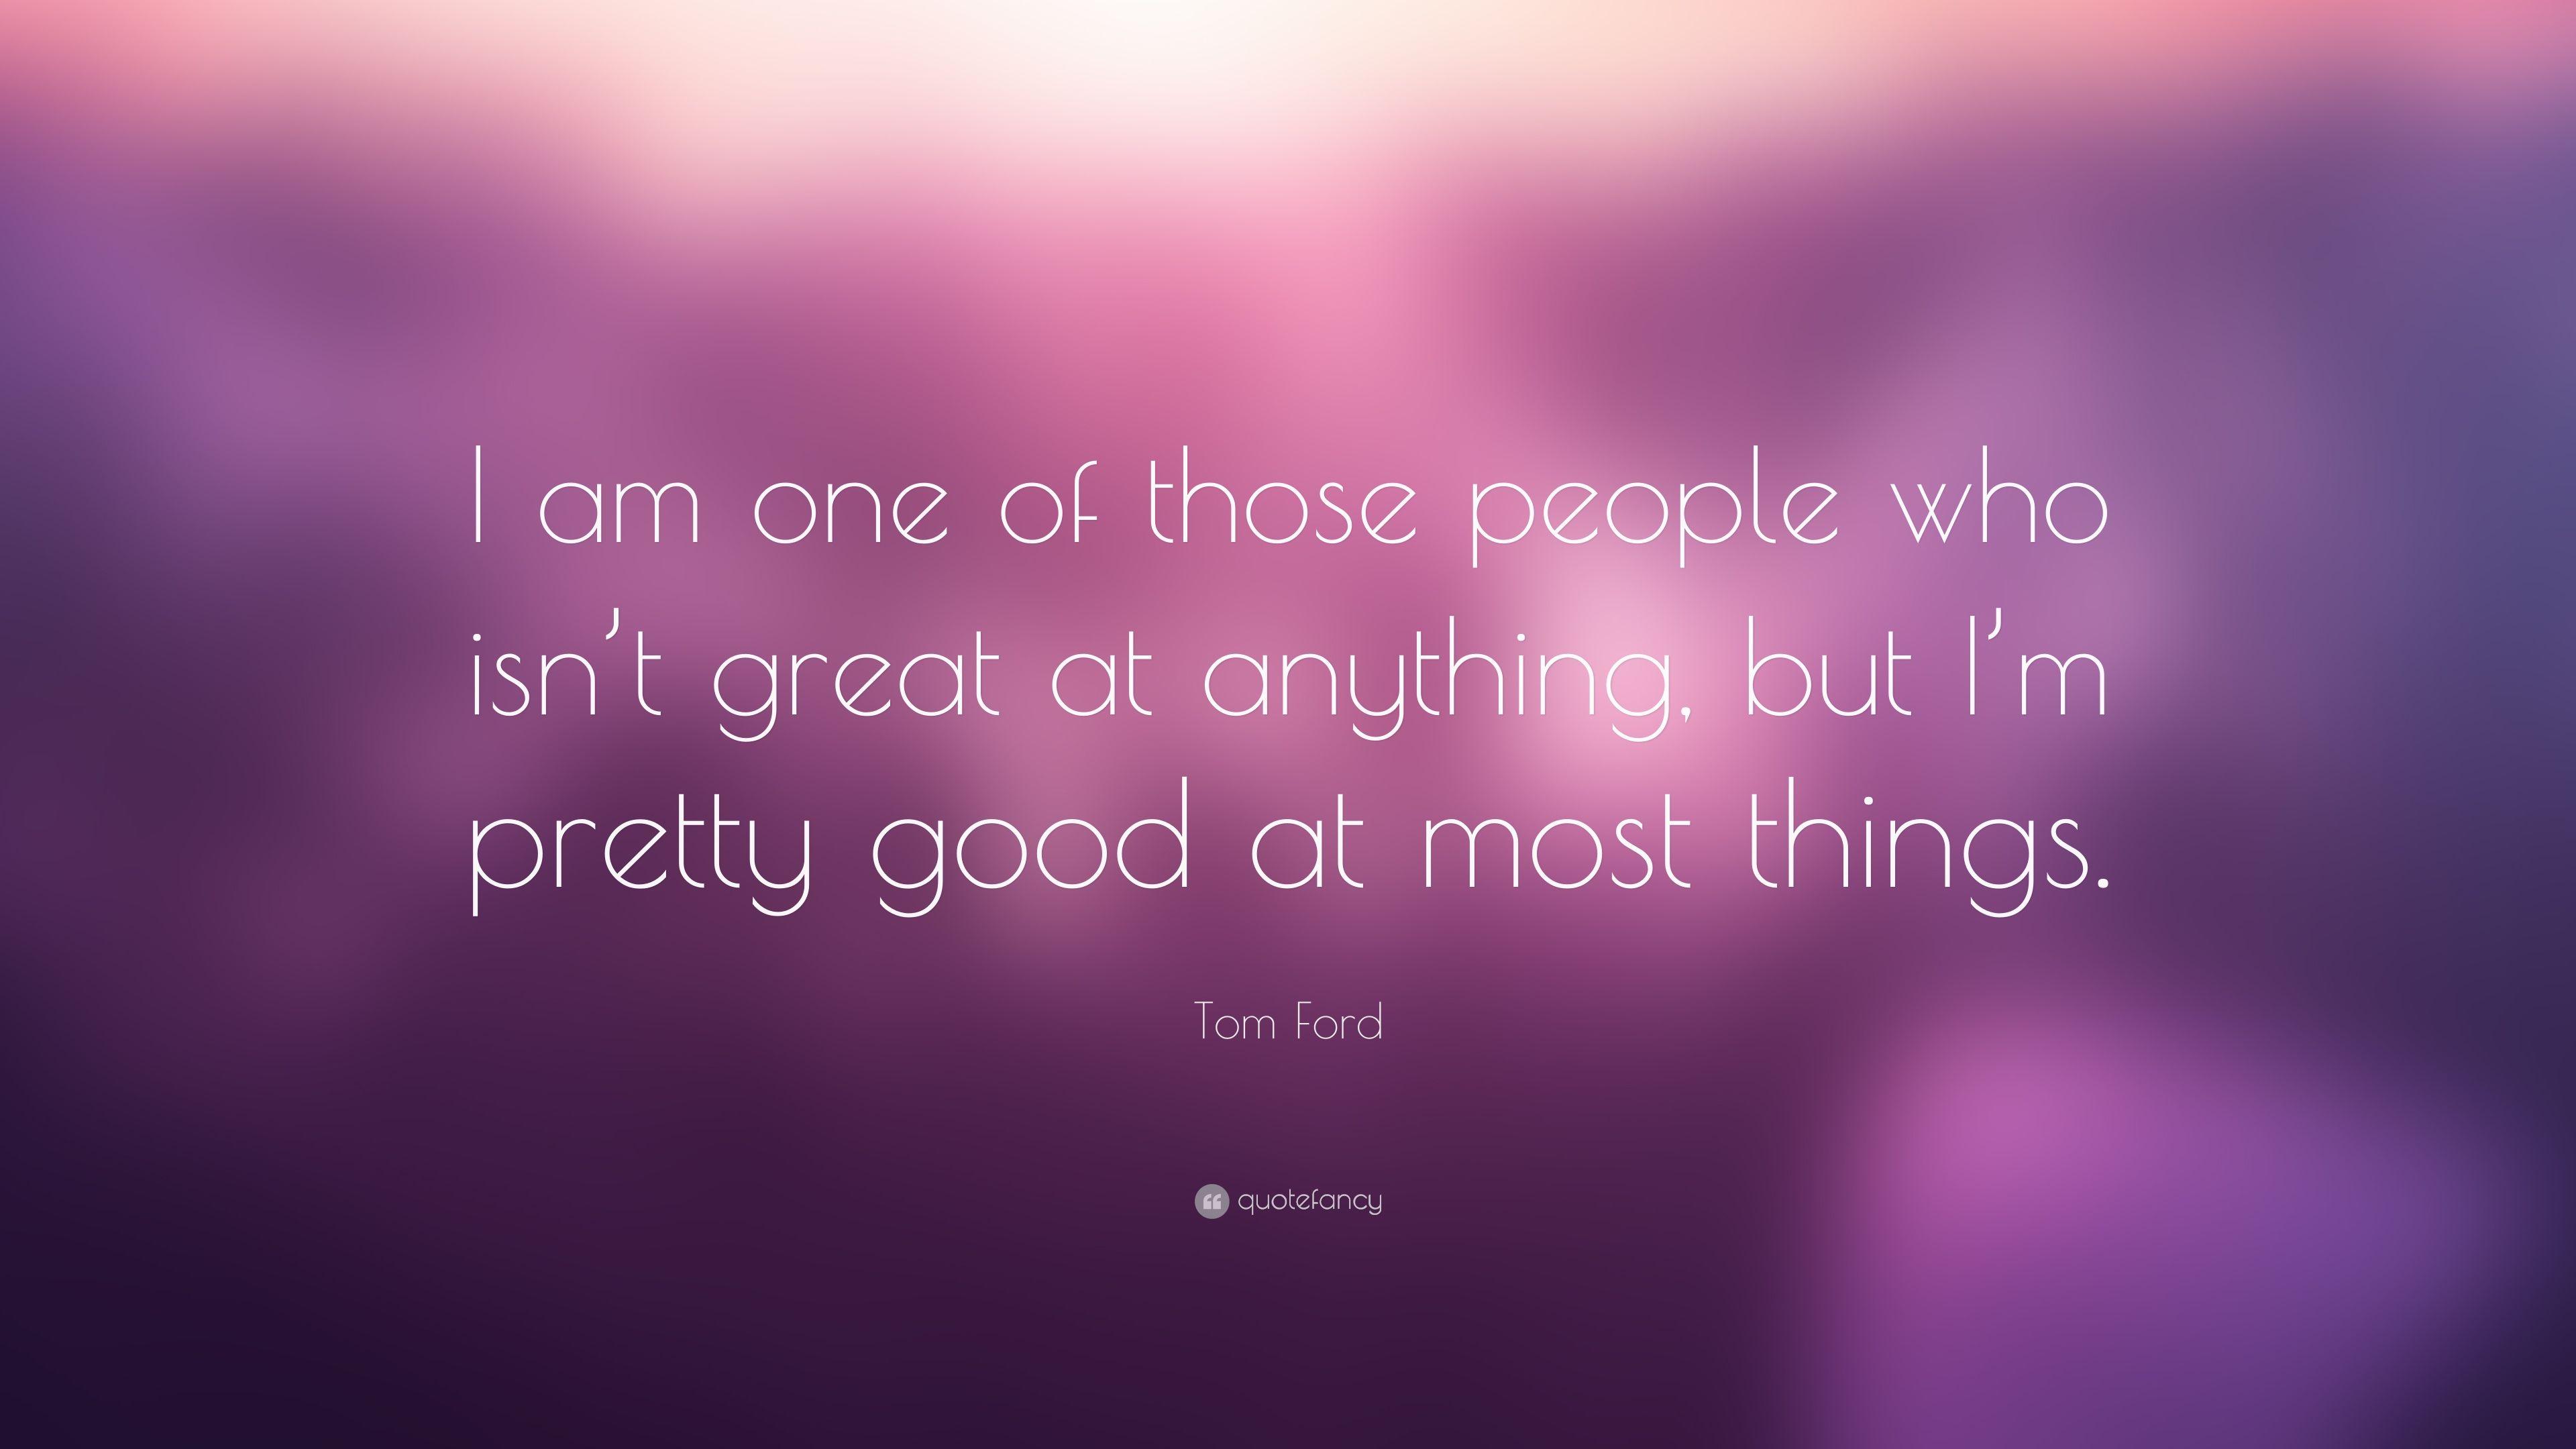 Tom Ford Quote: “I am one of those people who isn't great at